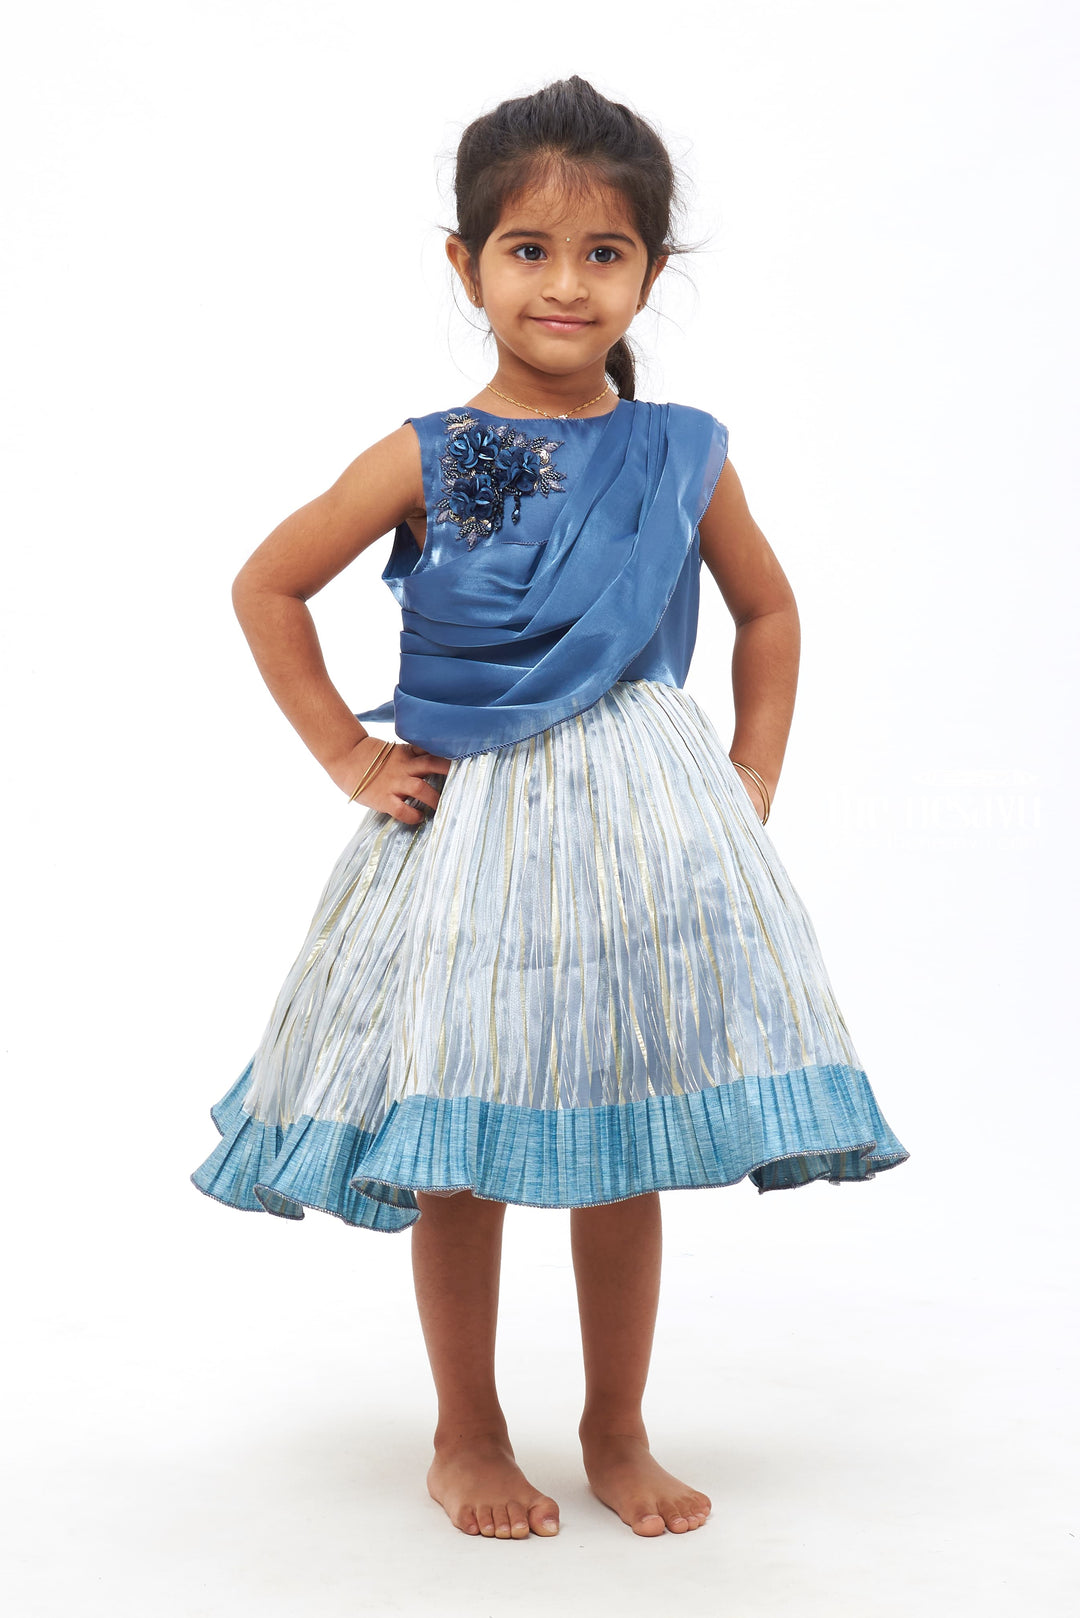 The Nesavu Girls Fancy Party Frock Floral Cutwork & Sequin Embroidered Elegant Party Dress for Girls Nesavu 16 (1Y) / Blue / Plain Net PF164A-16 Floral Cutwork Party Frock | Grey Designer Party Frock | The Nesavu